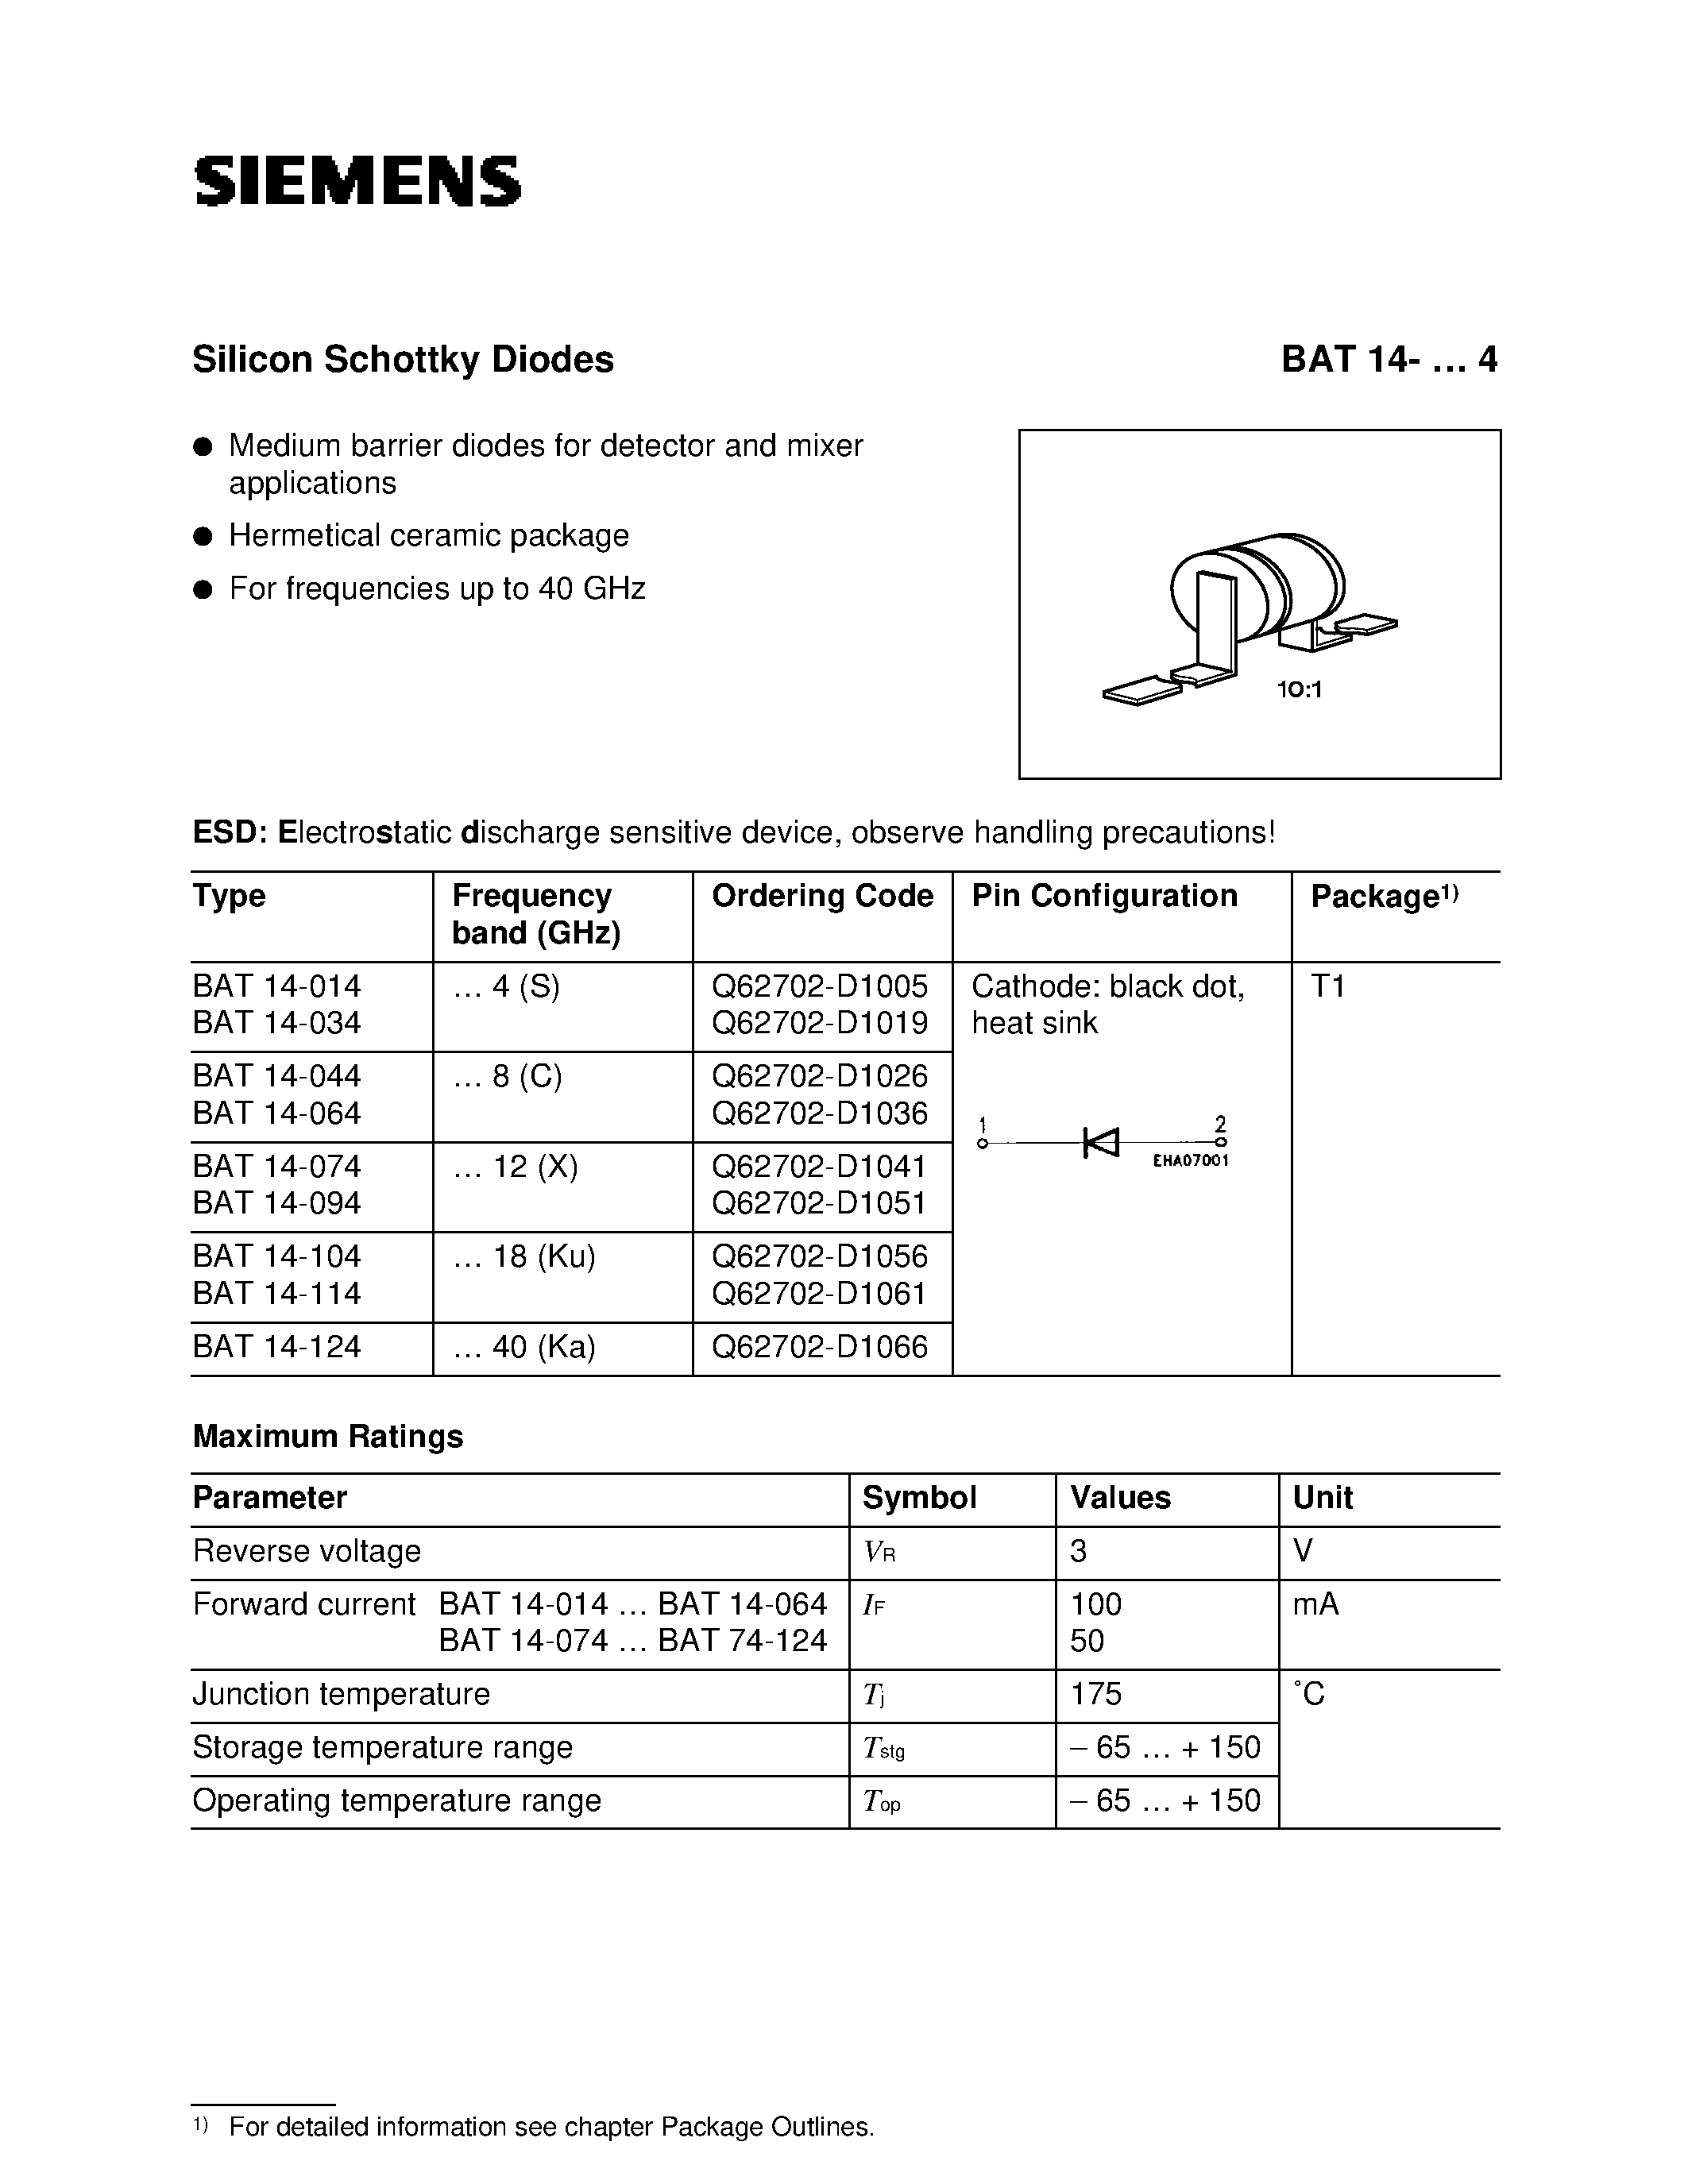 Datasheet BAT14-074 - HiRel Silicon Schottky Diode (HiRel Discrete and Microwave Semiconductor Medium barrier diodes for detector and mixer applications) page 1